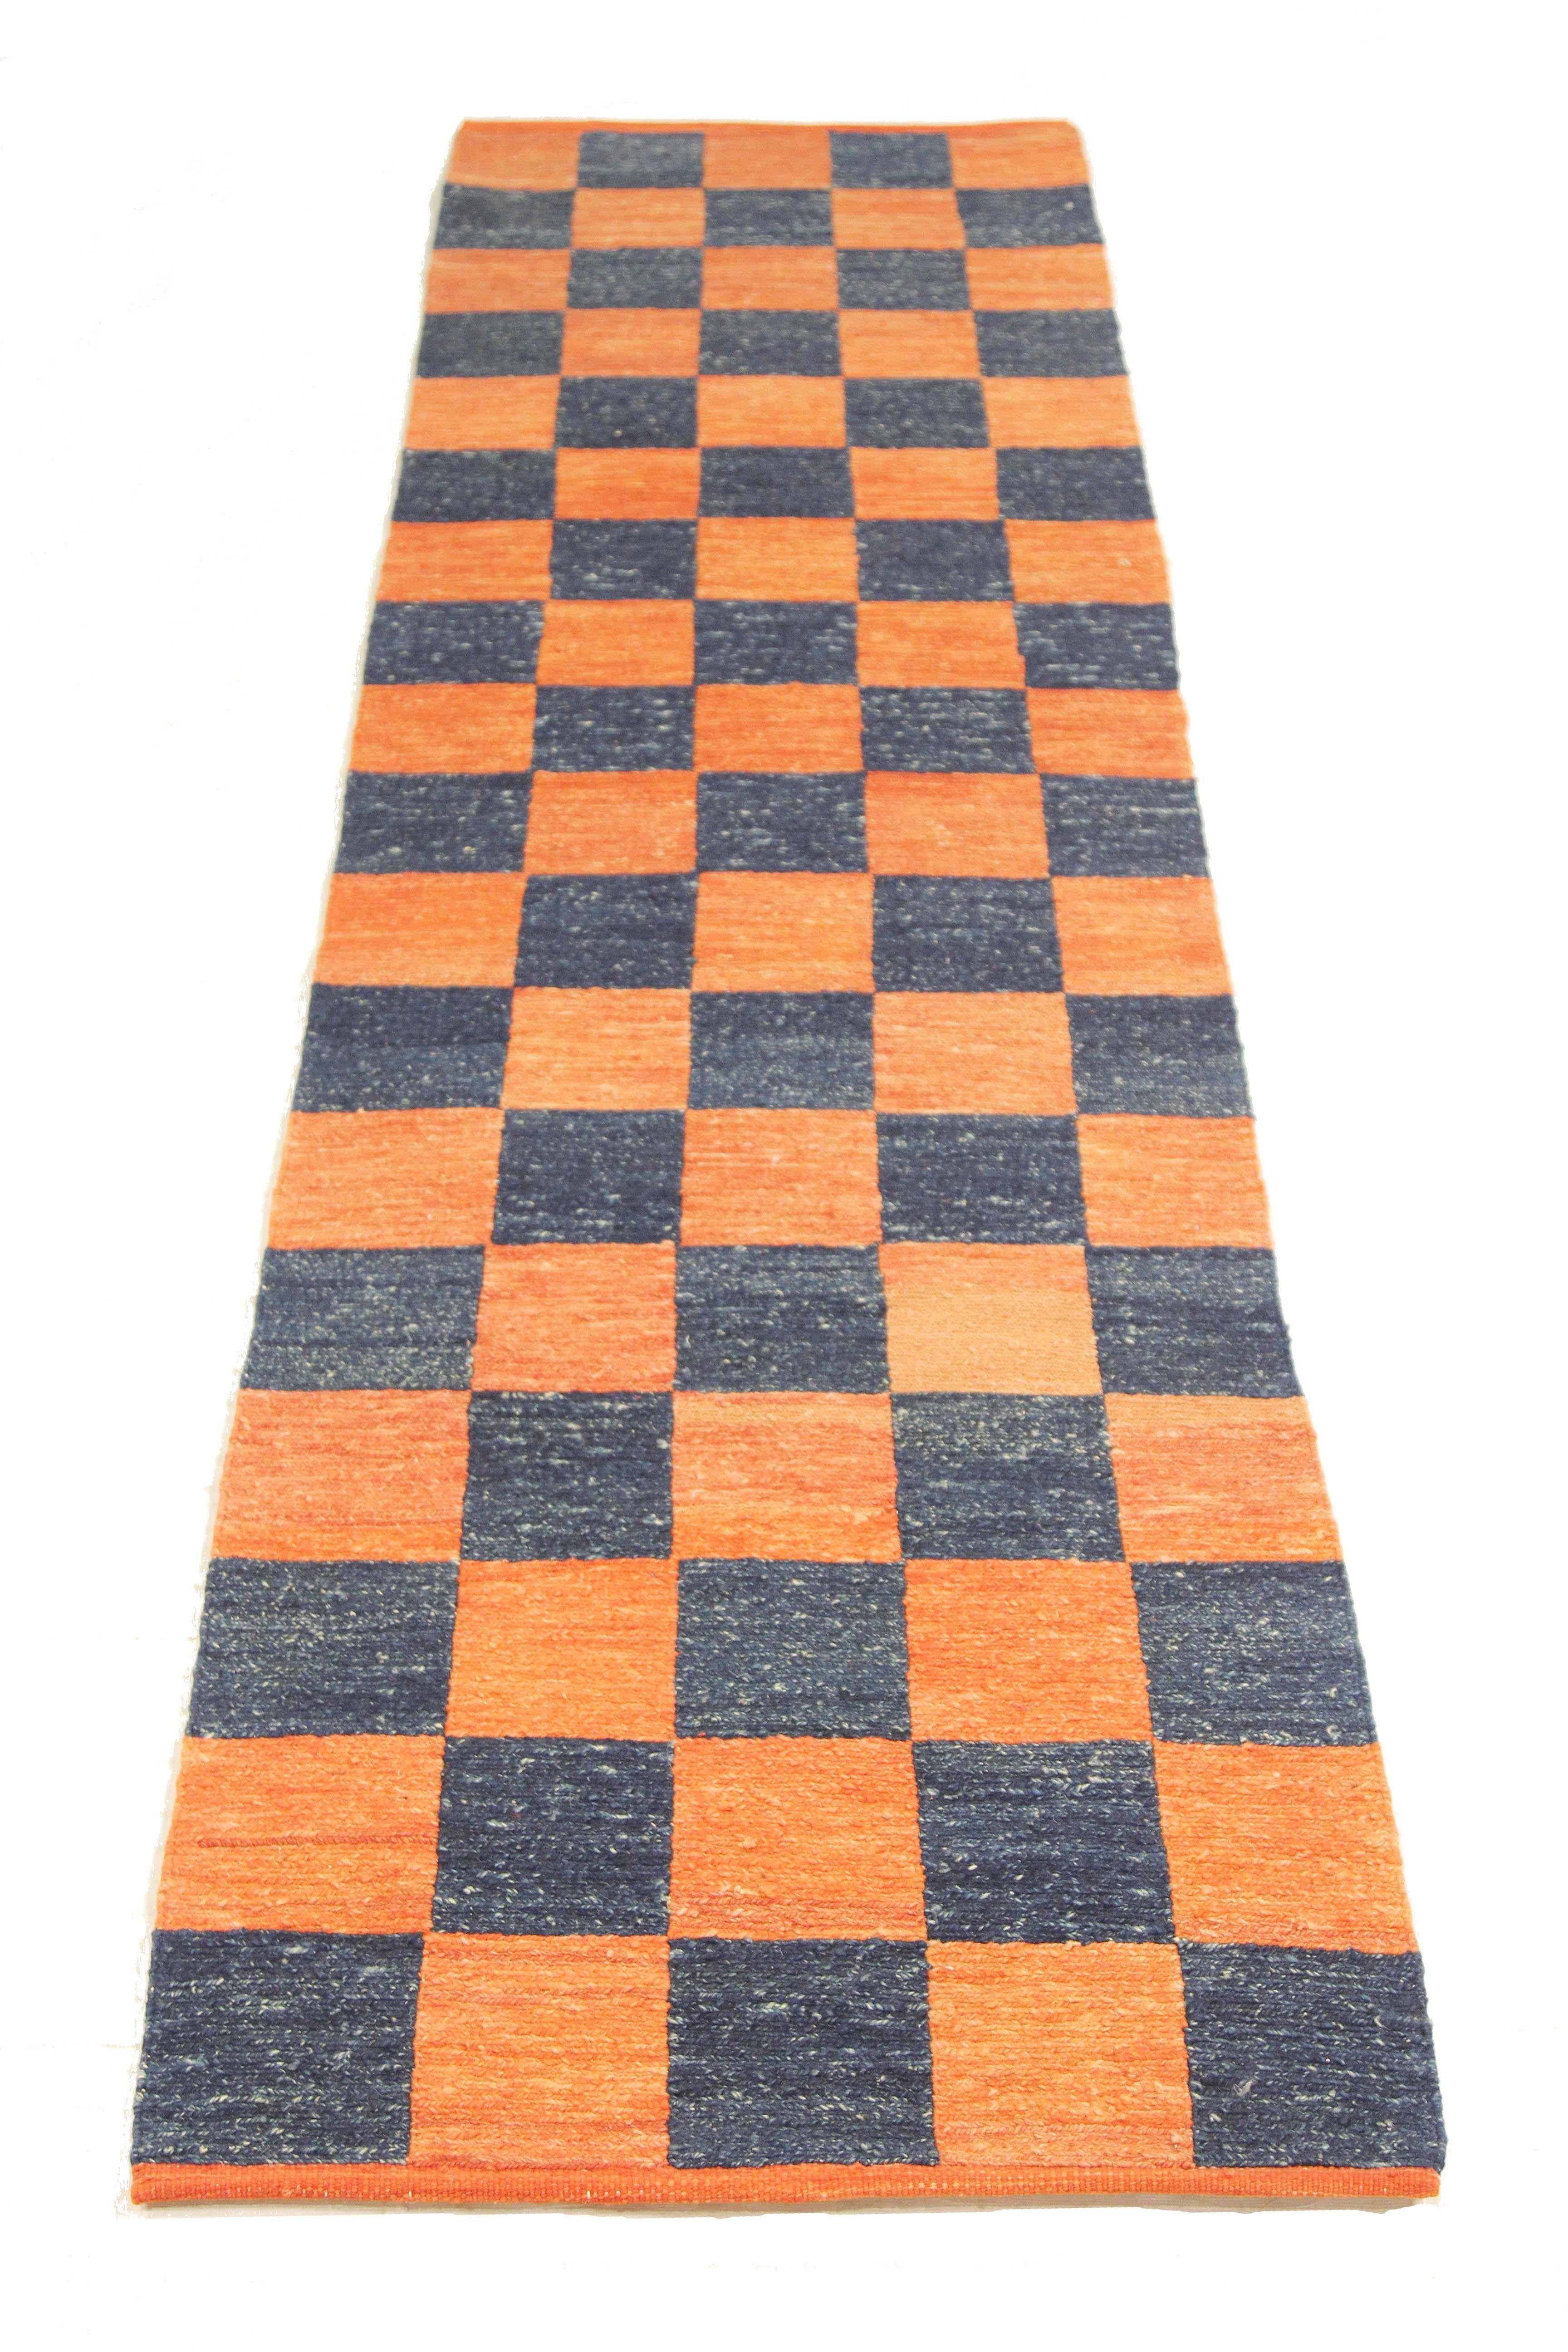 Turkish rug handwoven from the finest sheep’s wool and colored with all-natural vegetable dyes that are safe for humans and pets. It’s a traditional Kilim flat-weave design featuring navy blue tile patterns on a plush orange field. It’s a stunning